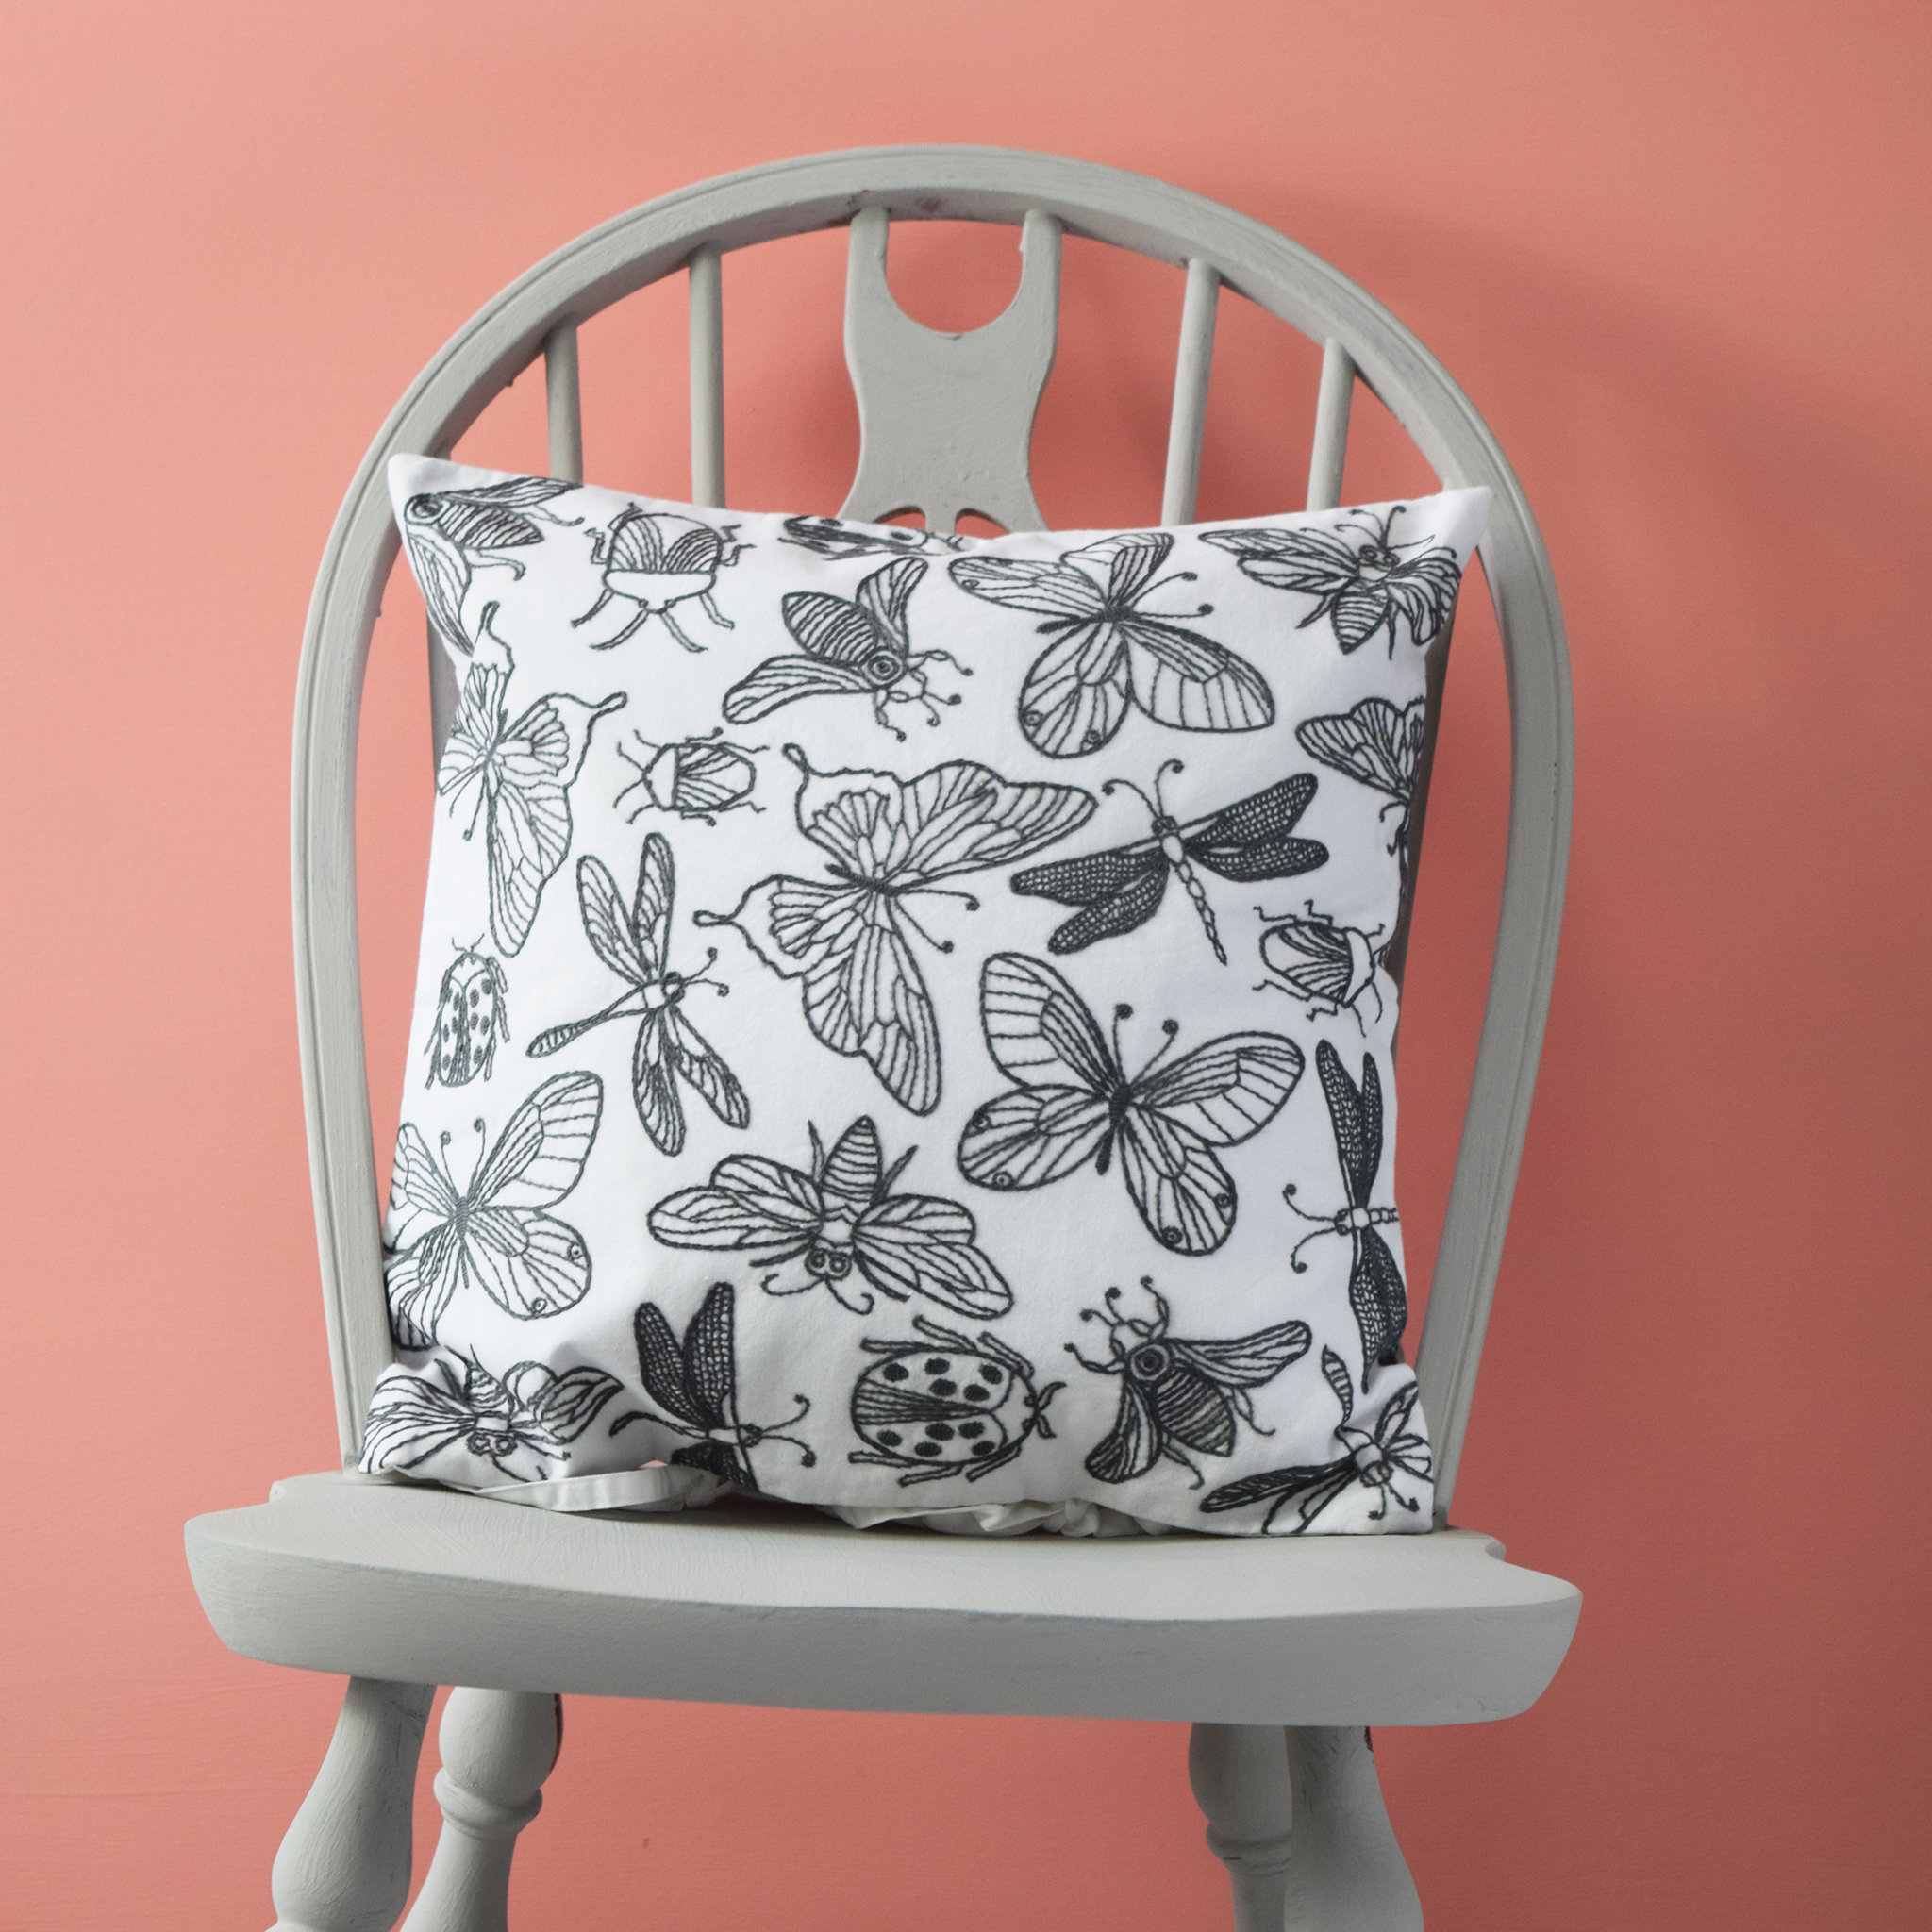 Bugs and Butterflies, Embroidered Cushion Cover 16" x 16"